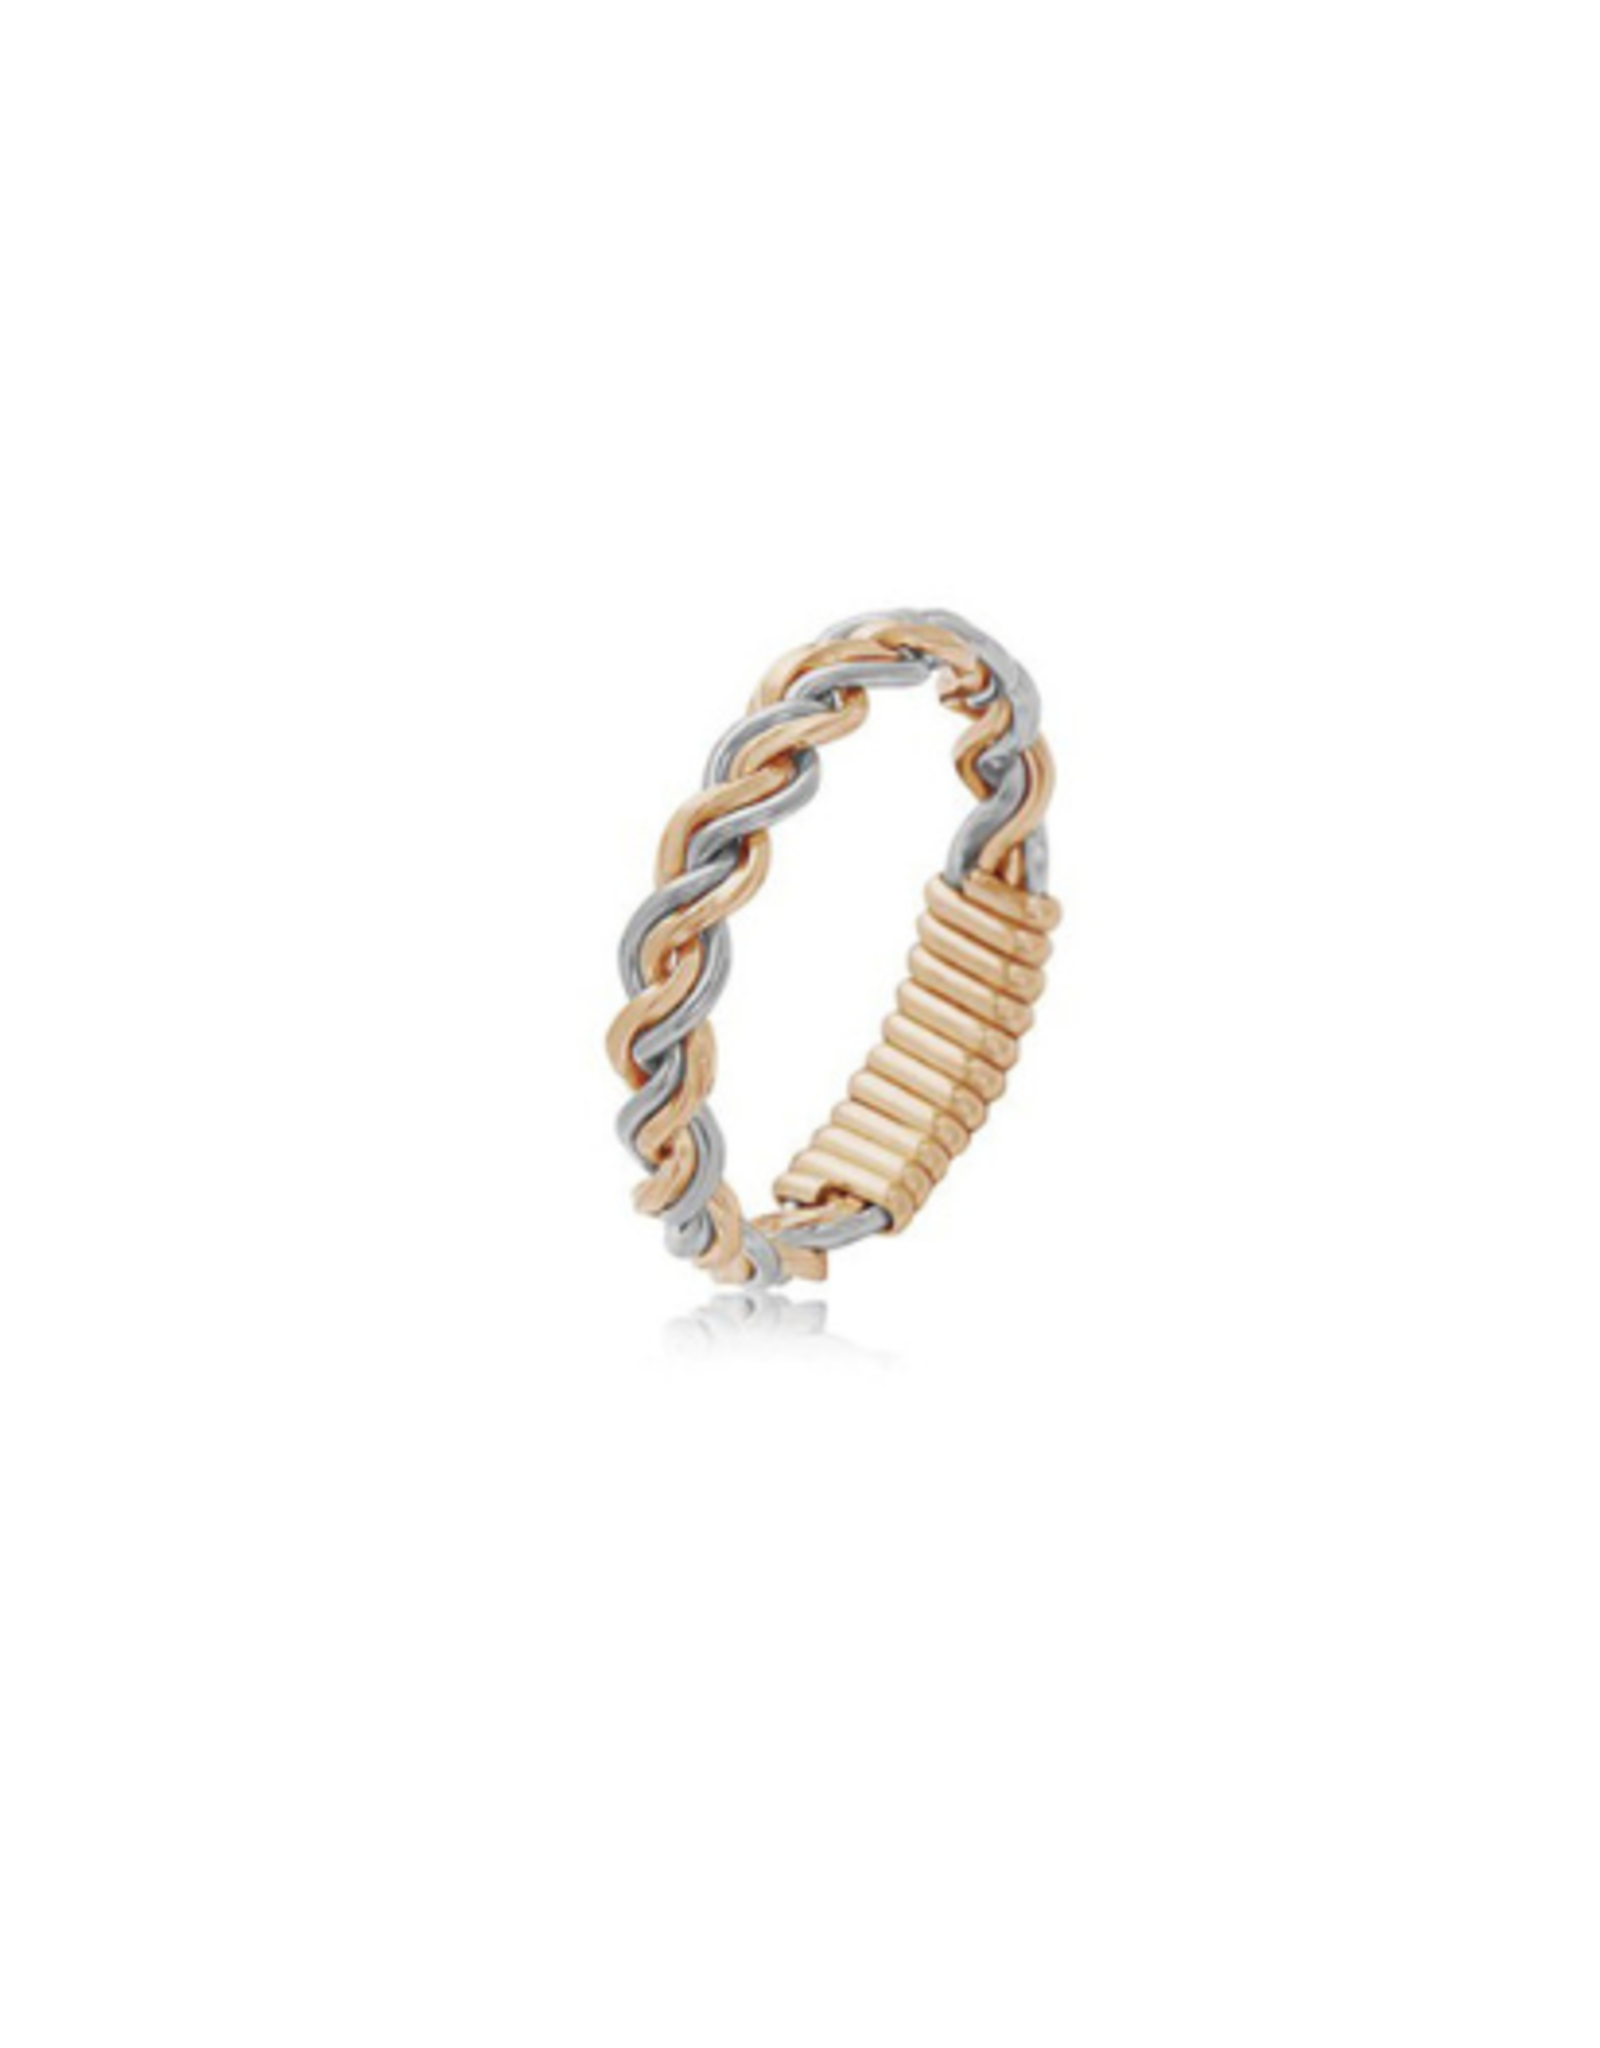 Love Knot Ring Gold/ Silver